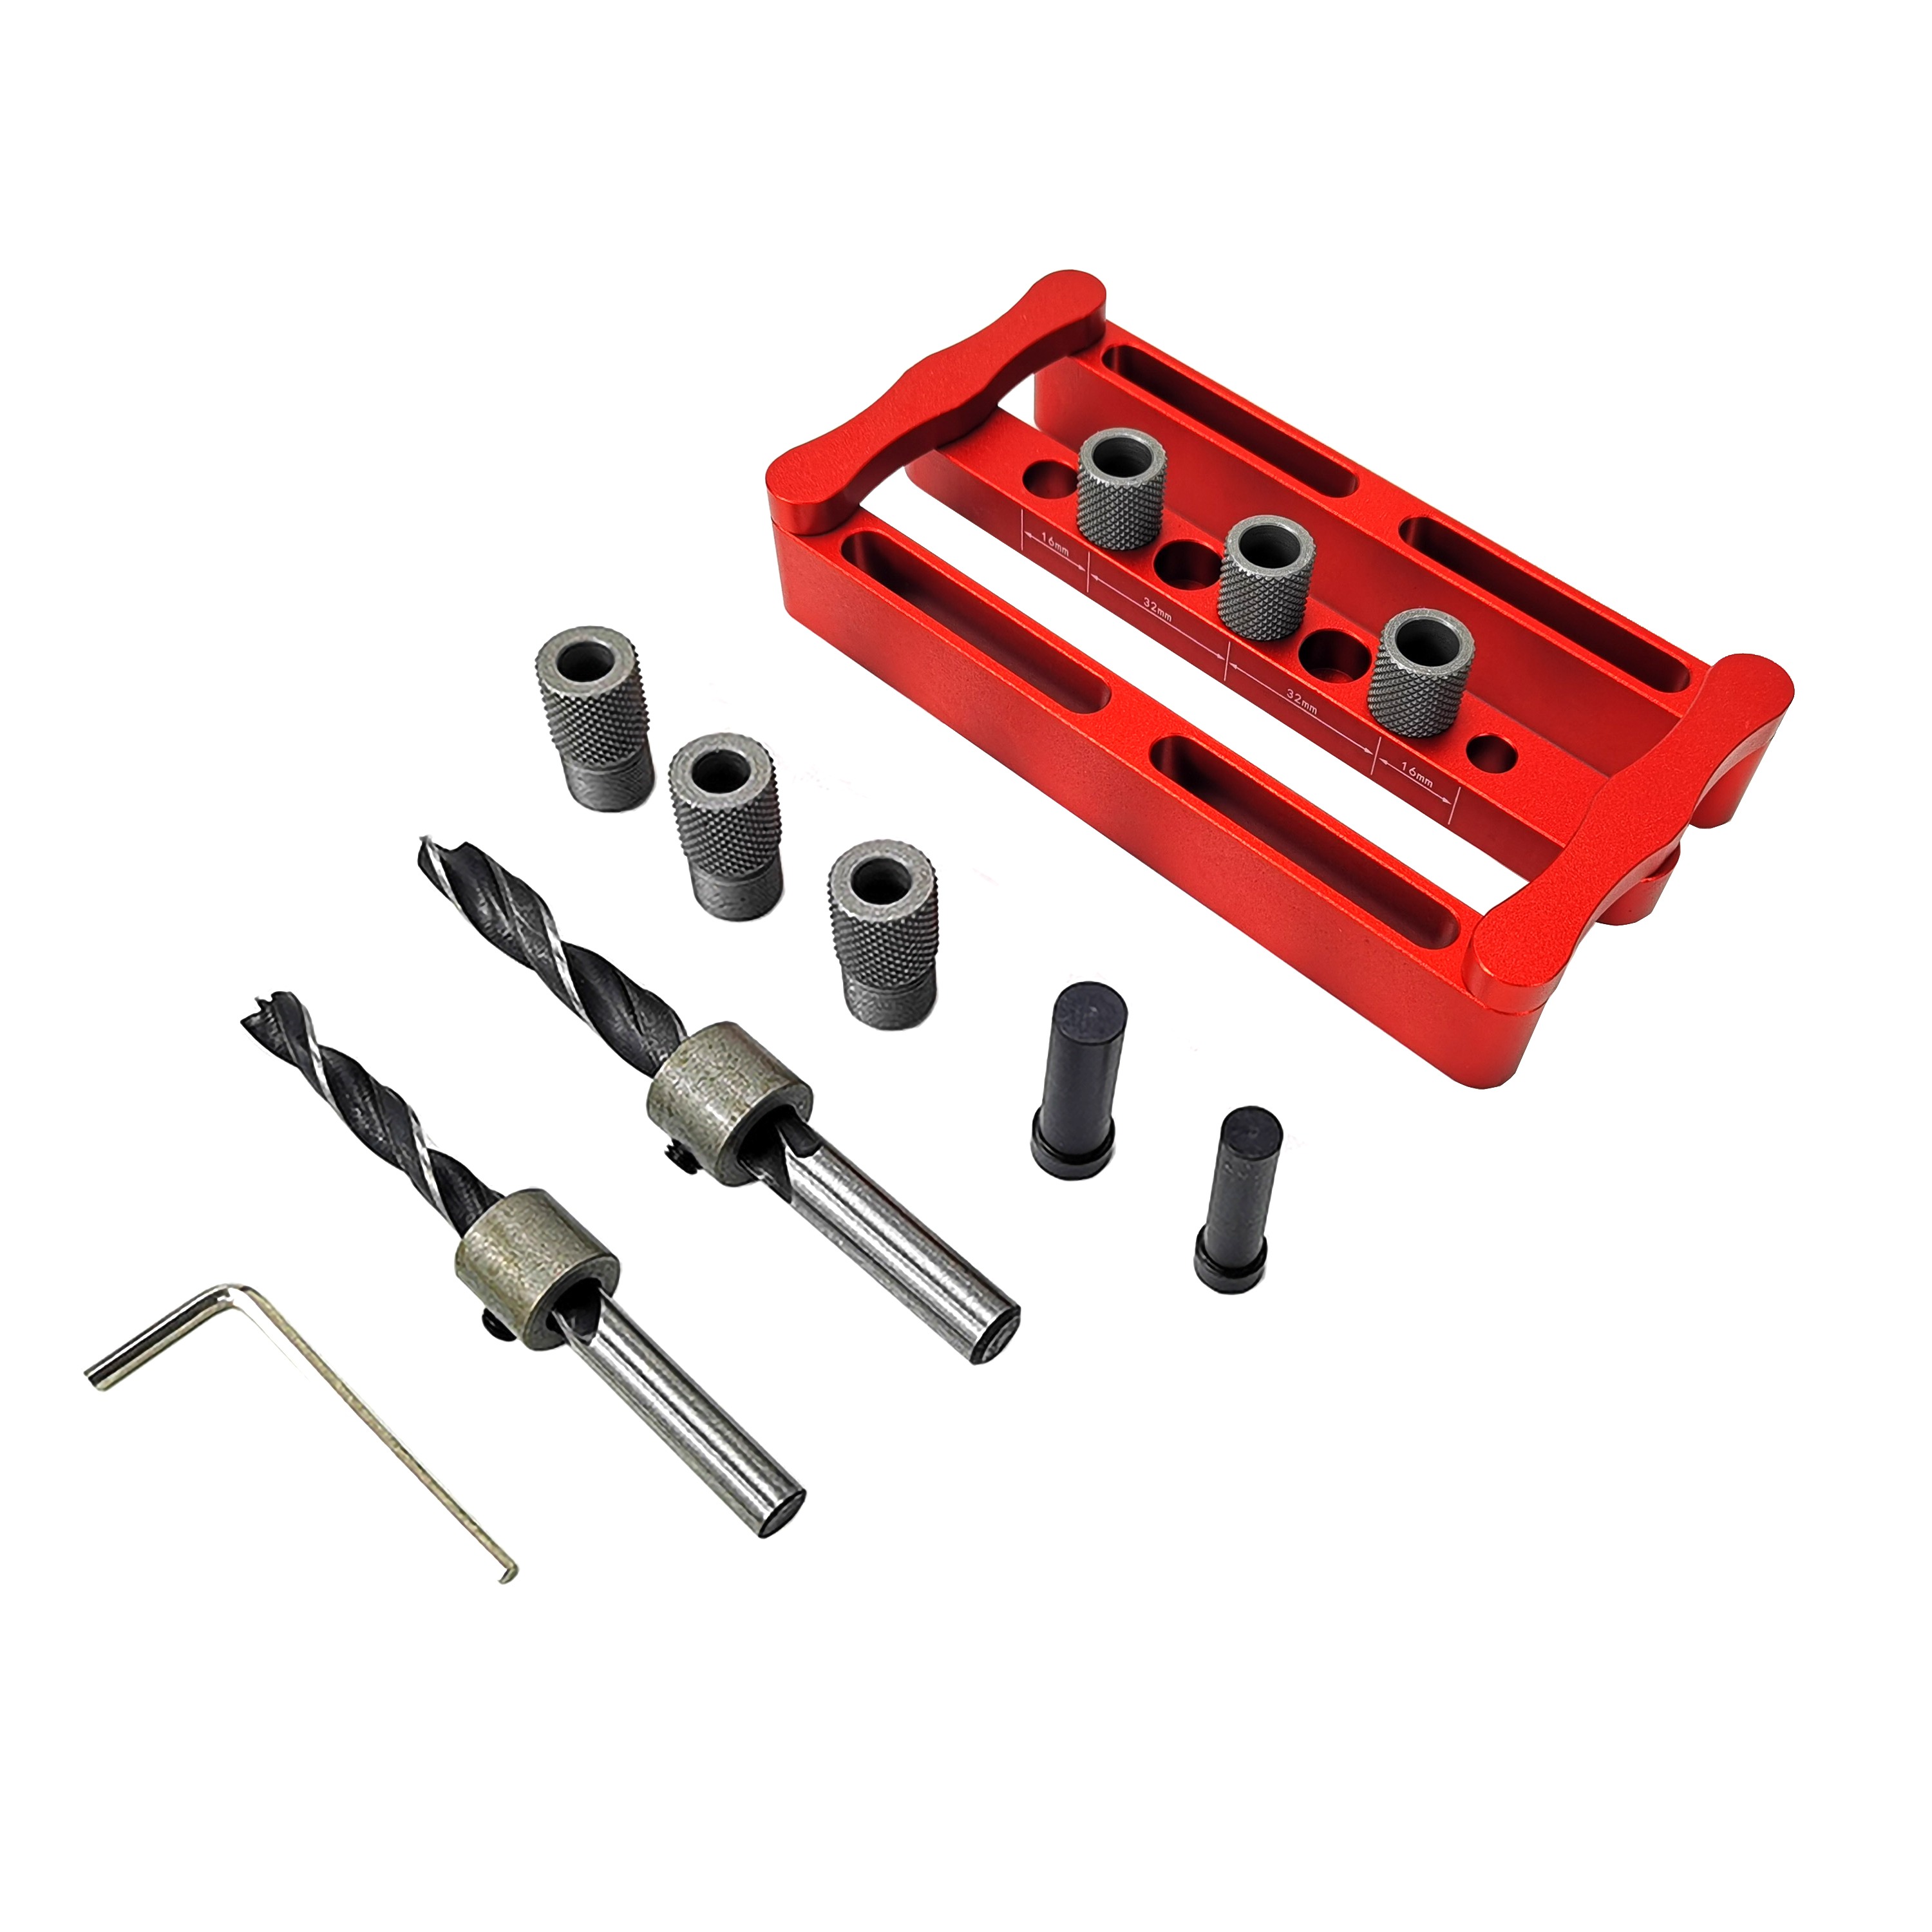 ENJOYWOOD X320 Self Centering Dowelling Jig Metric Inch Dowel Punch Locator Drilling Tools for Woodworking - Metric